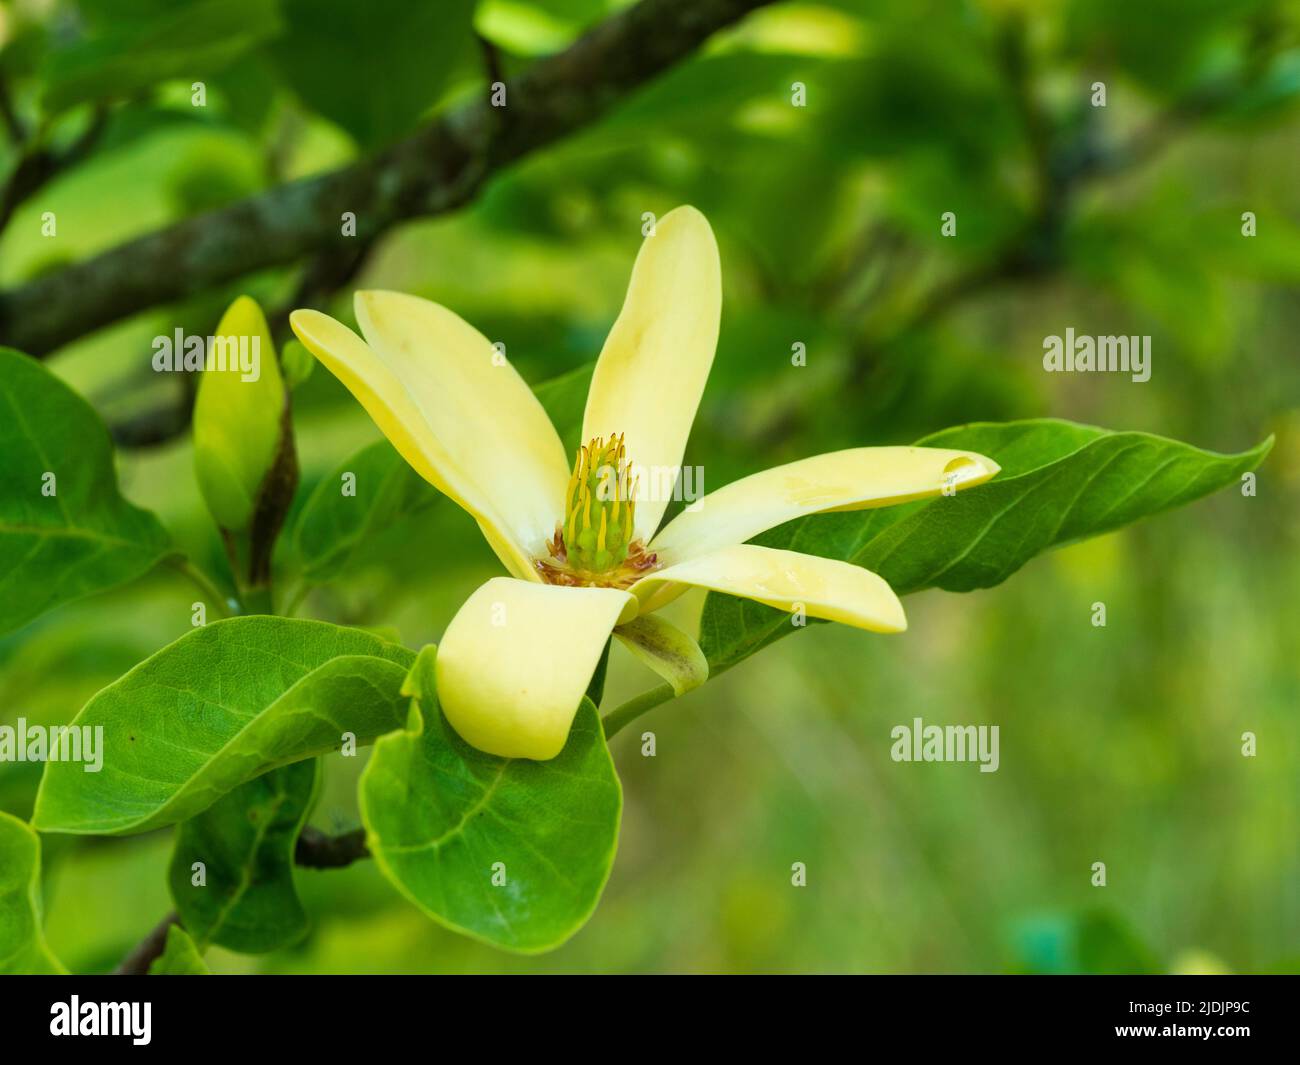 Comparatively small yellow flower of the early summer blooming deciduous large shrub or small tree, Magnolia 'Daphne' Stock Photo